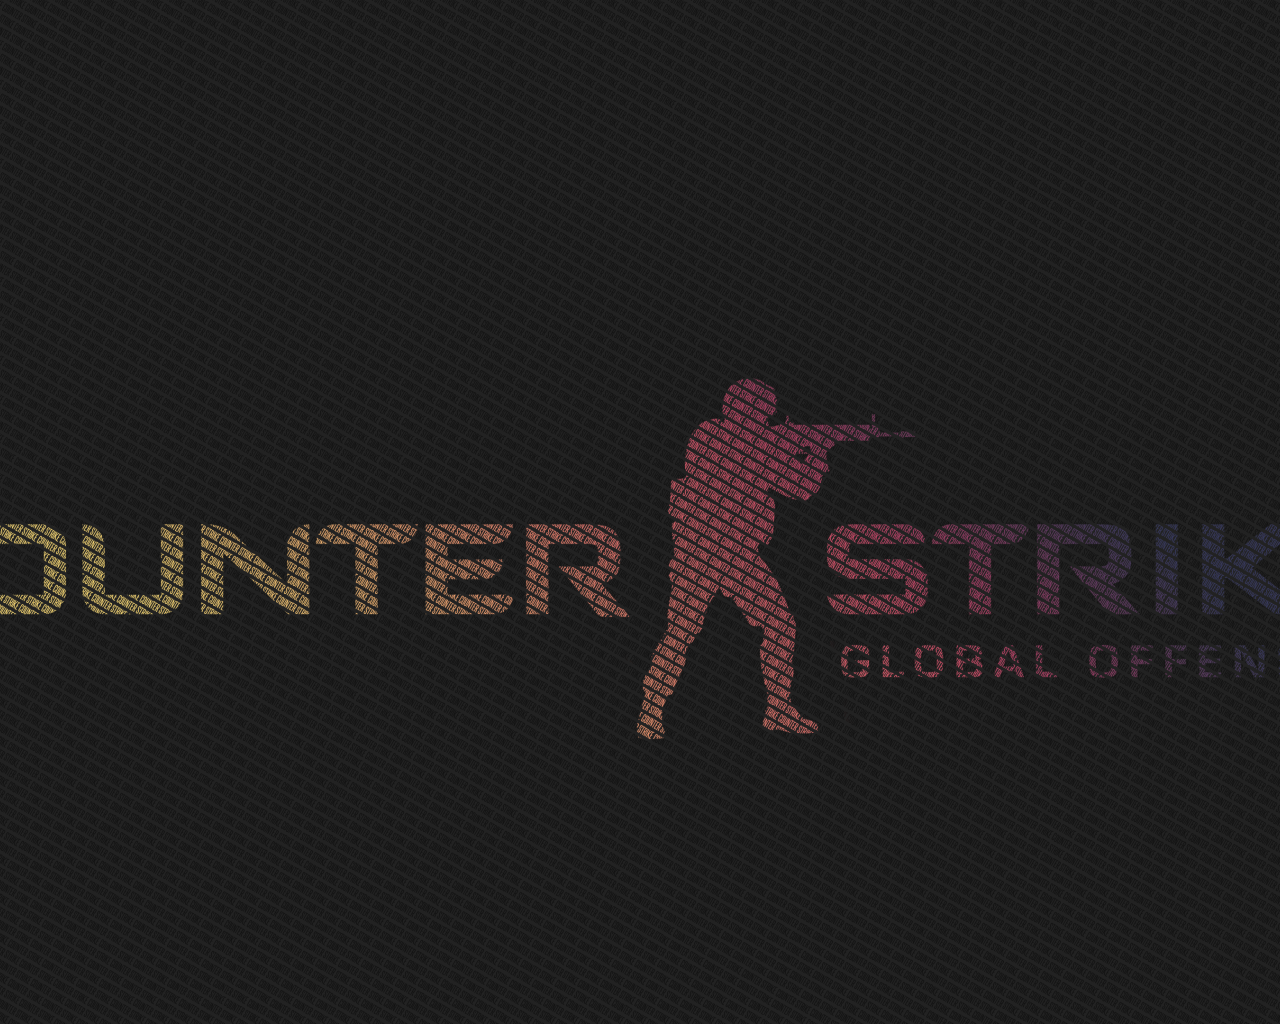 Counter-Strike: Global Offensive poster on a gray background